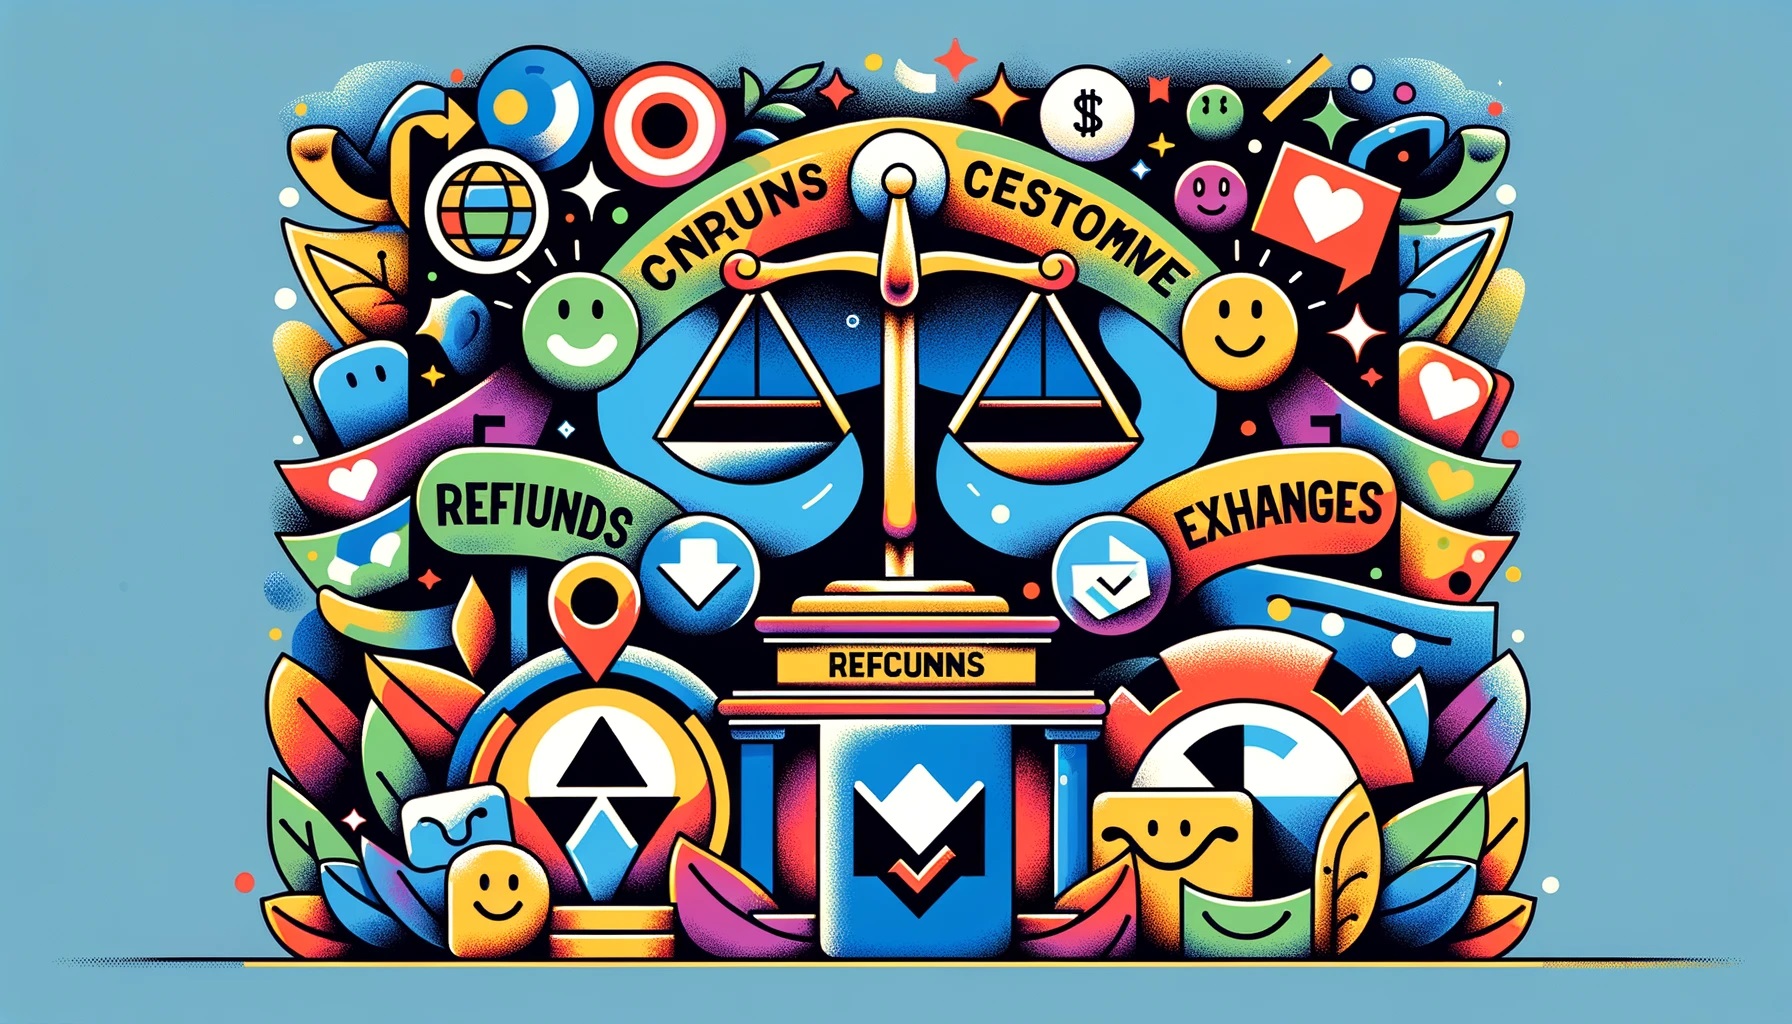 Policies Refunds Returns  Exchanges 2024-03-19 17.59.57 -  comprehensive customer service policies focusing on Refunds Ret Refunds & Exchanges Policy - Your Guide to Hassle-Free Transactions - BISTRO BUDDY | Food & Drink Community Network  Explore our fair Refunds, Returns & Exchanges policies.